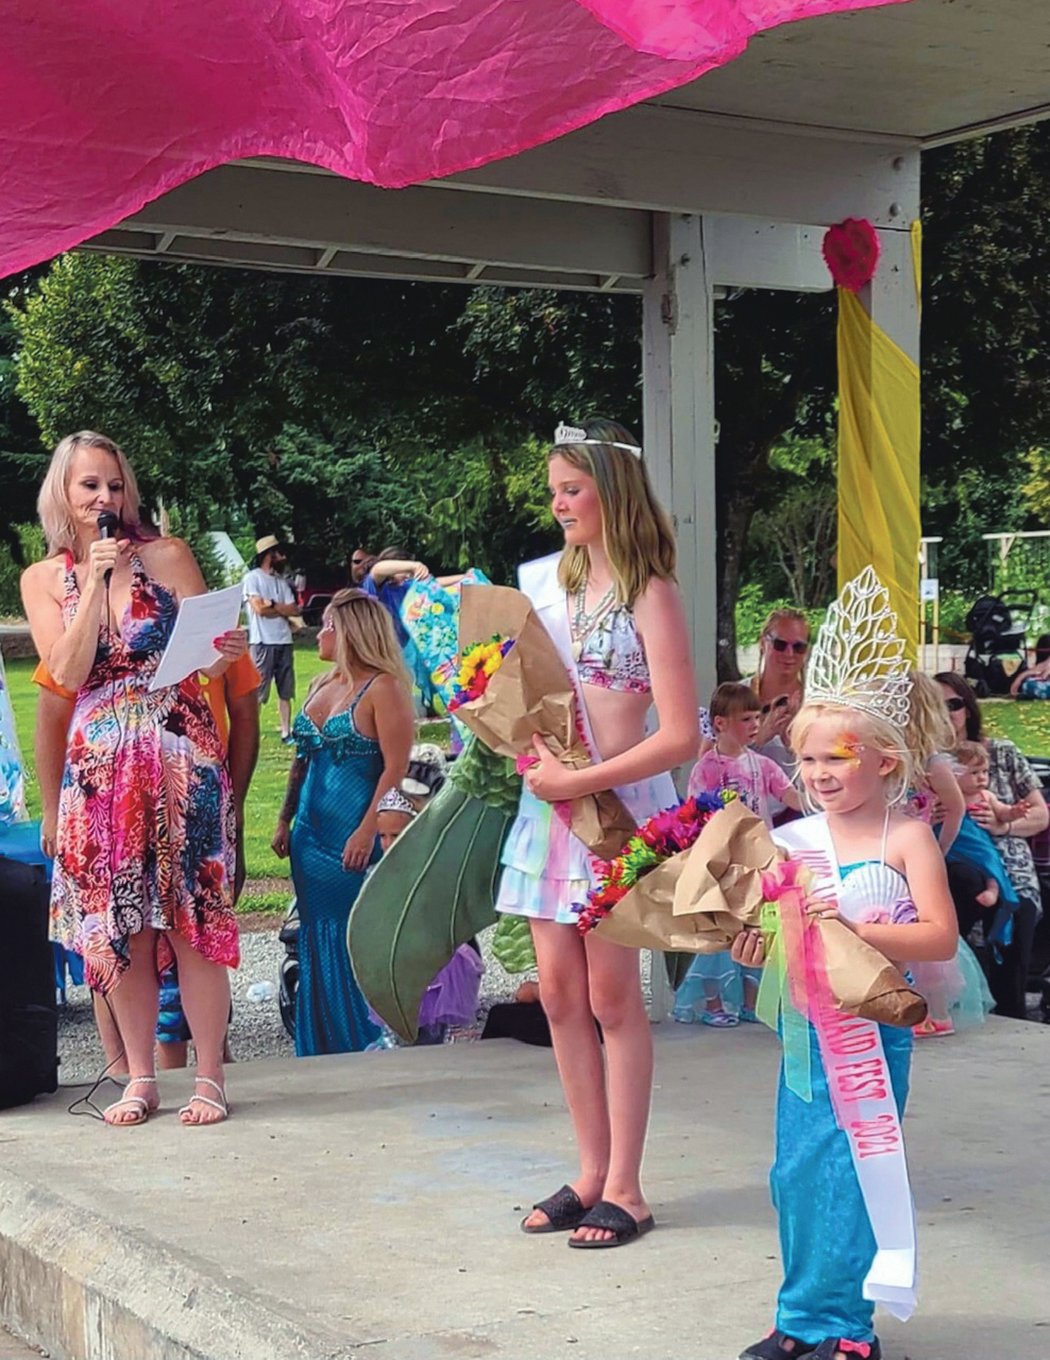 At right, the 2021 Kids Mermaid Fest Queen Keegan Mcmenamy, of Rainier, and 1st runner up Sophia Heidinger, of Chehelis, center, accept their crowns at Yelm Mermaid Festival Saturday, July 17, at Yelm City Park.